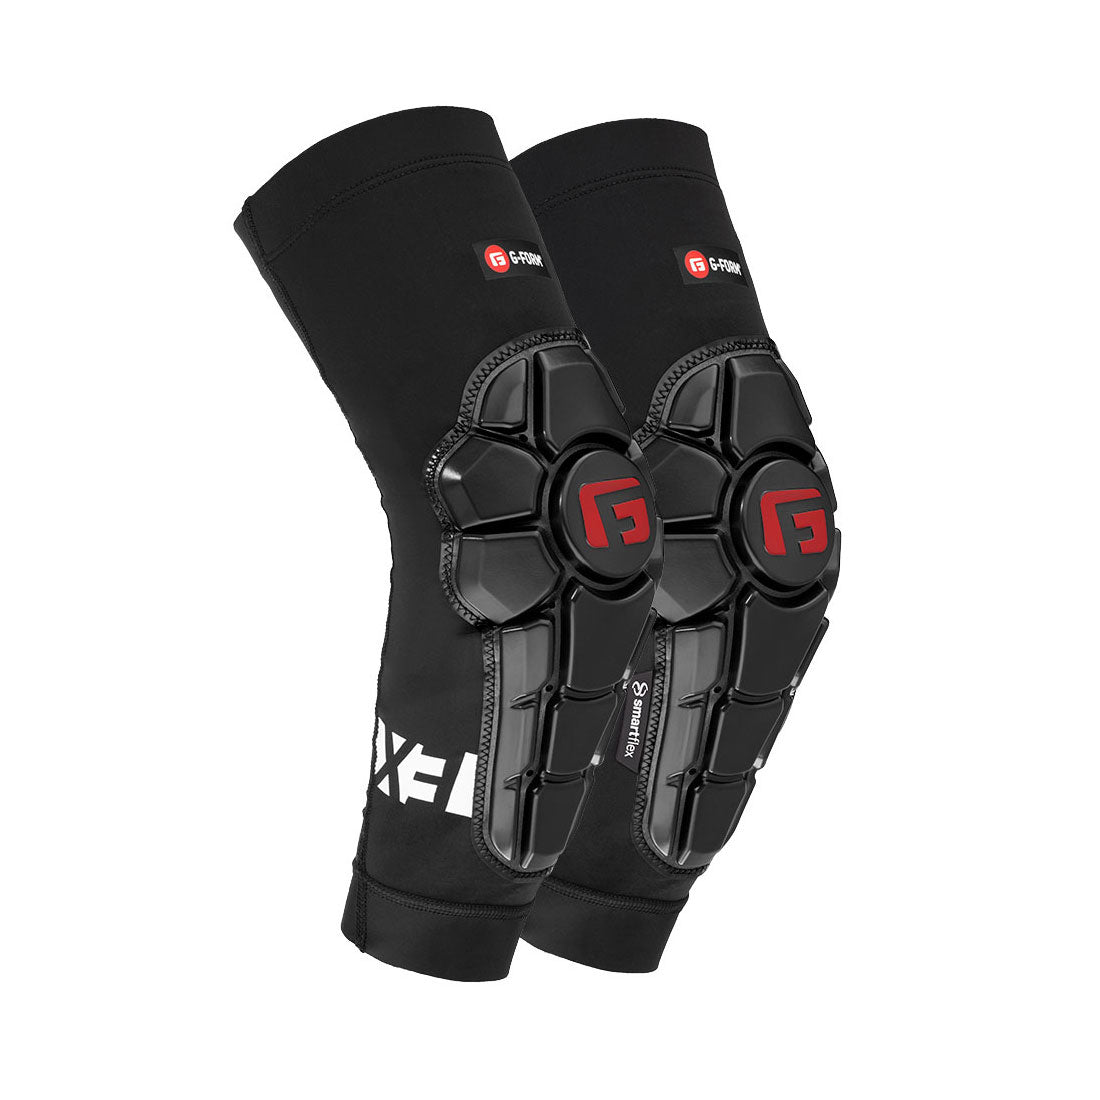 G-Form Pro-X3 Elbow - Adult Protective Gear